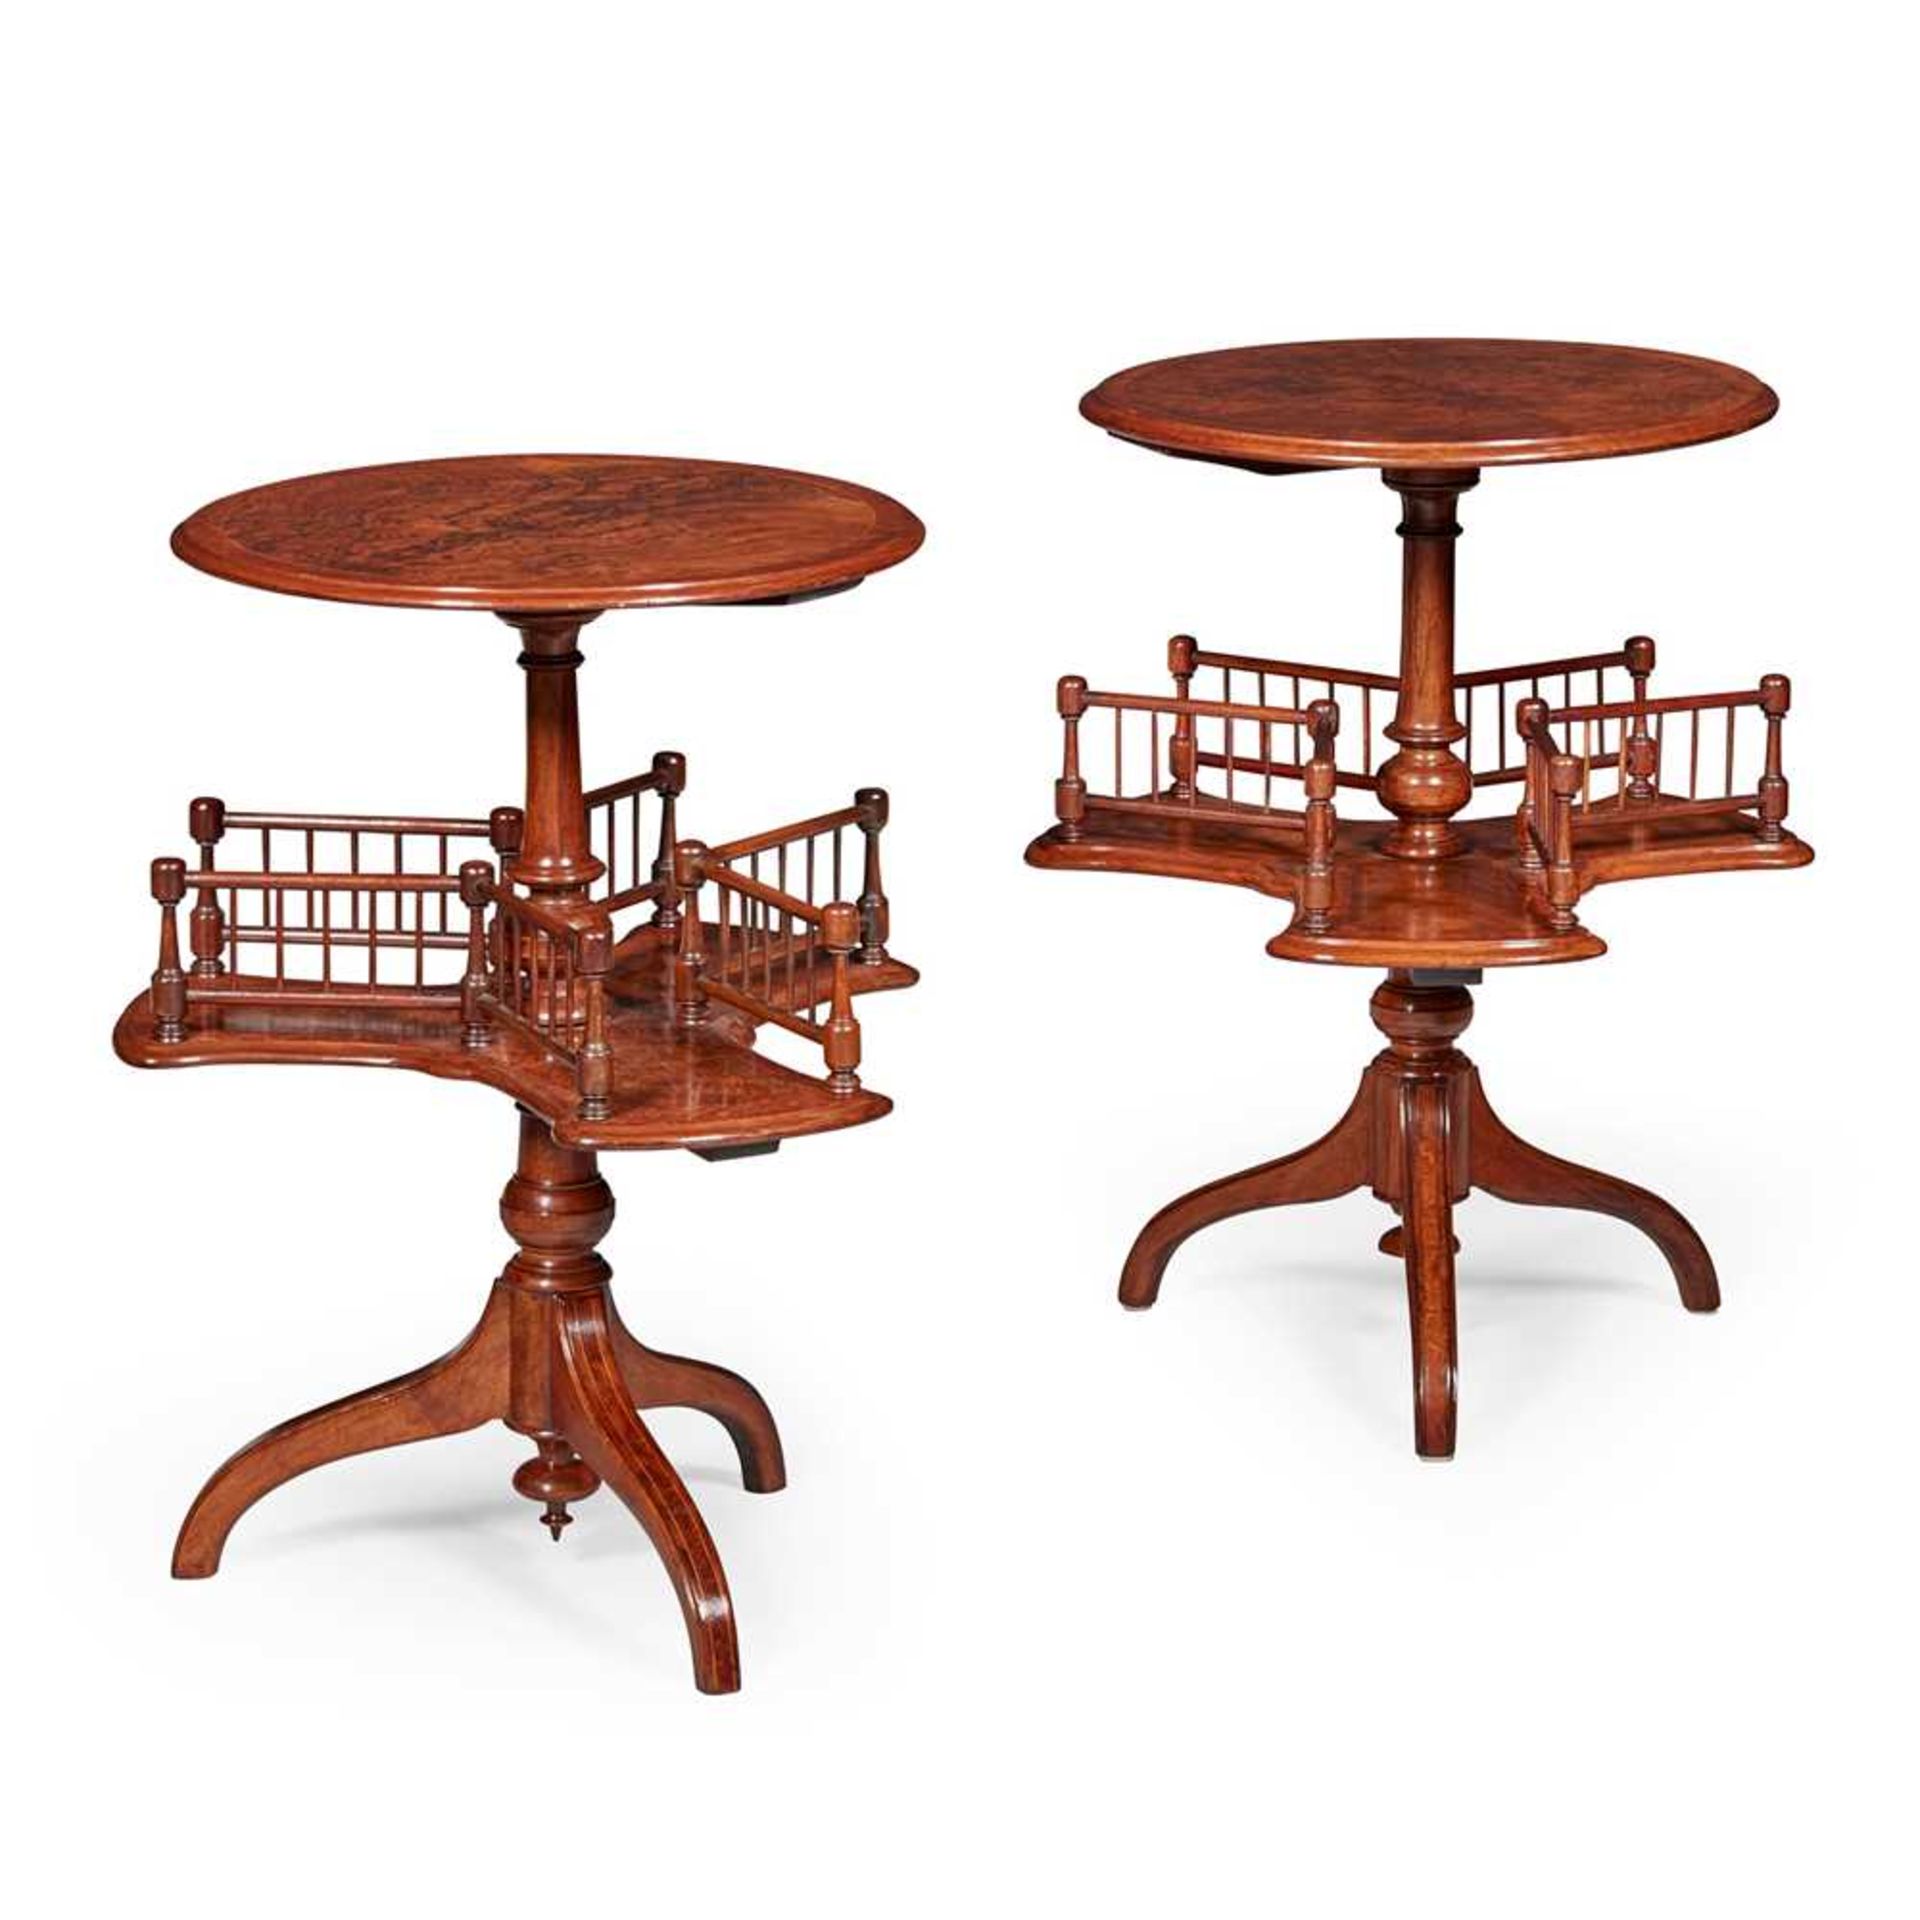 PAIR OF LATE VICTORIAN BURR WALNUT AND THUYA REVOLVING BOOK STANDS LATE 19TH CENTURY